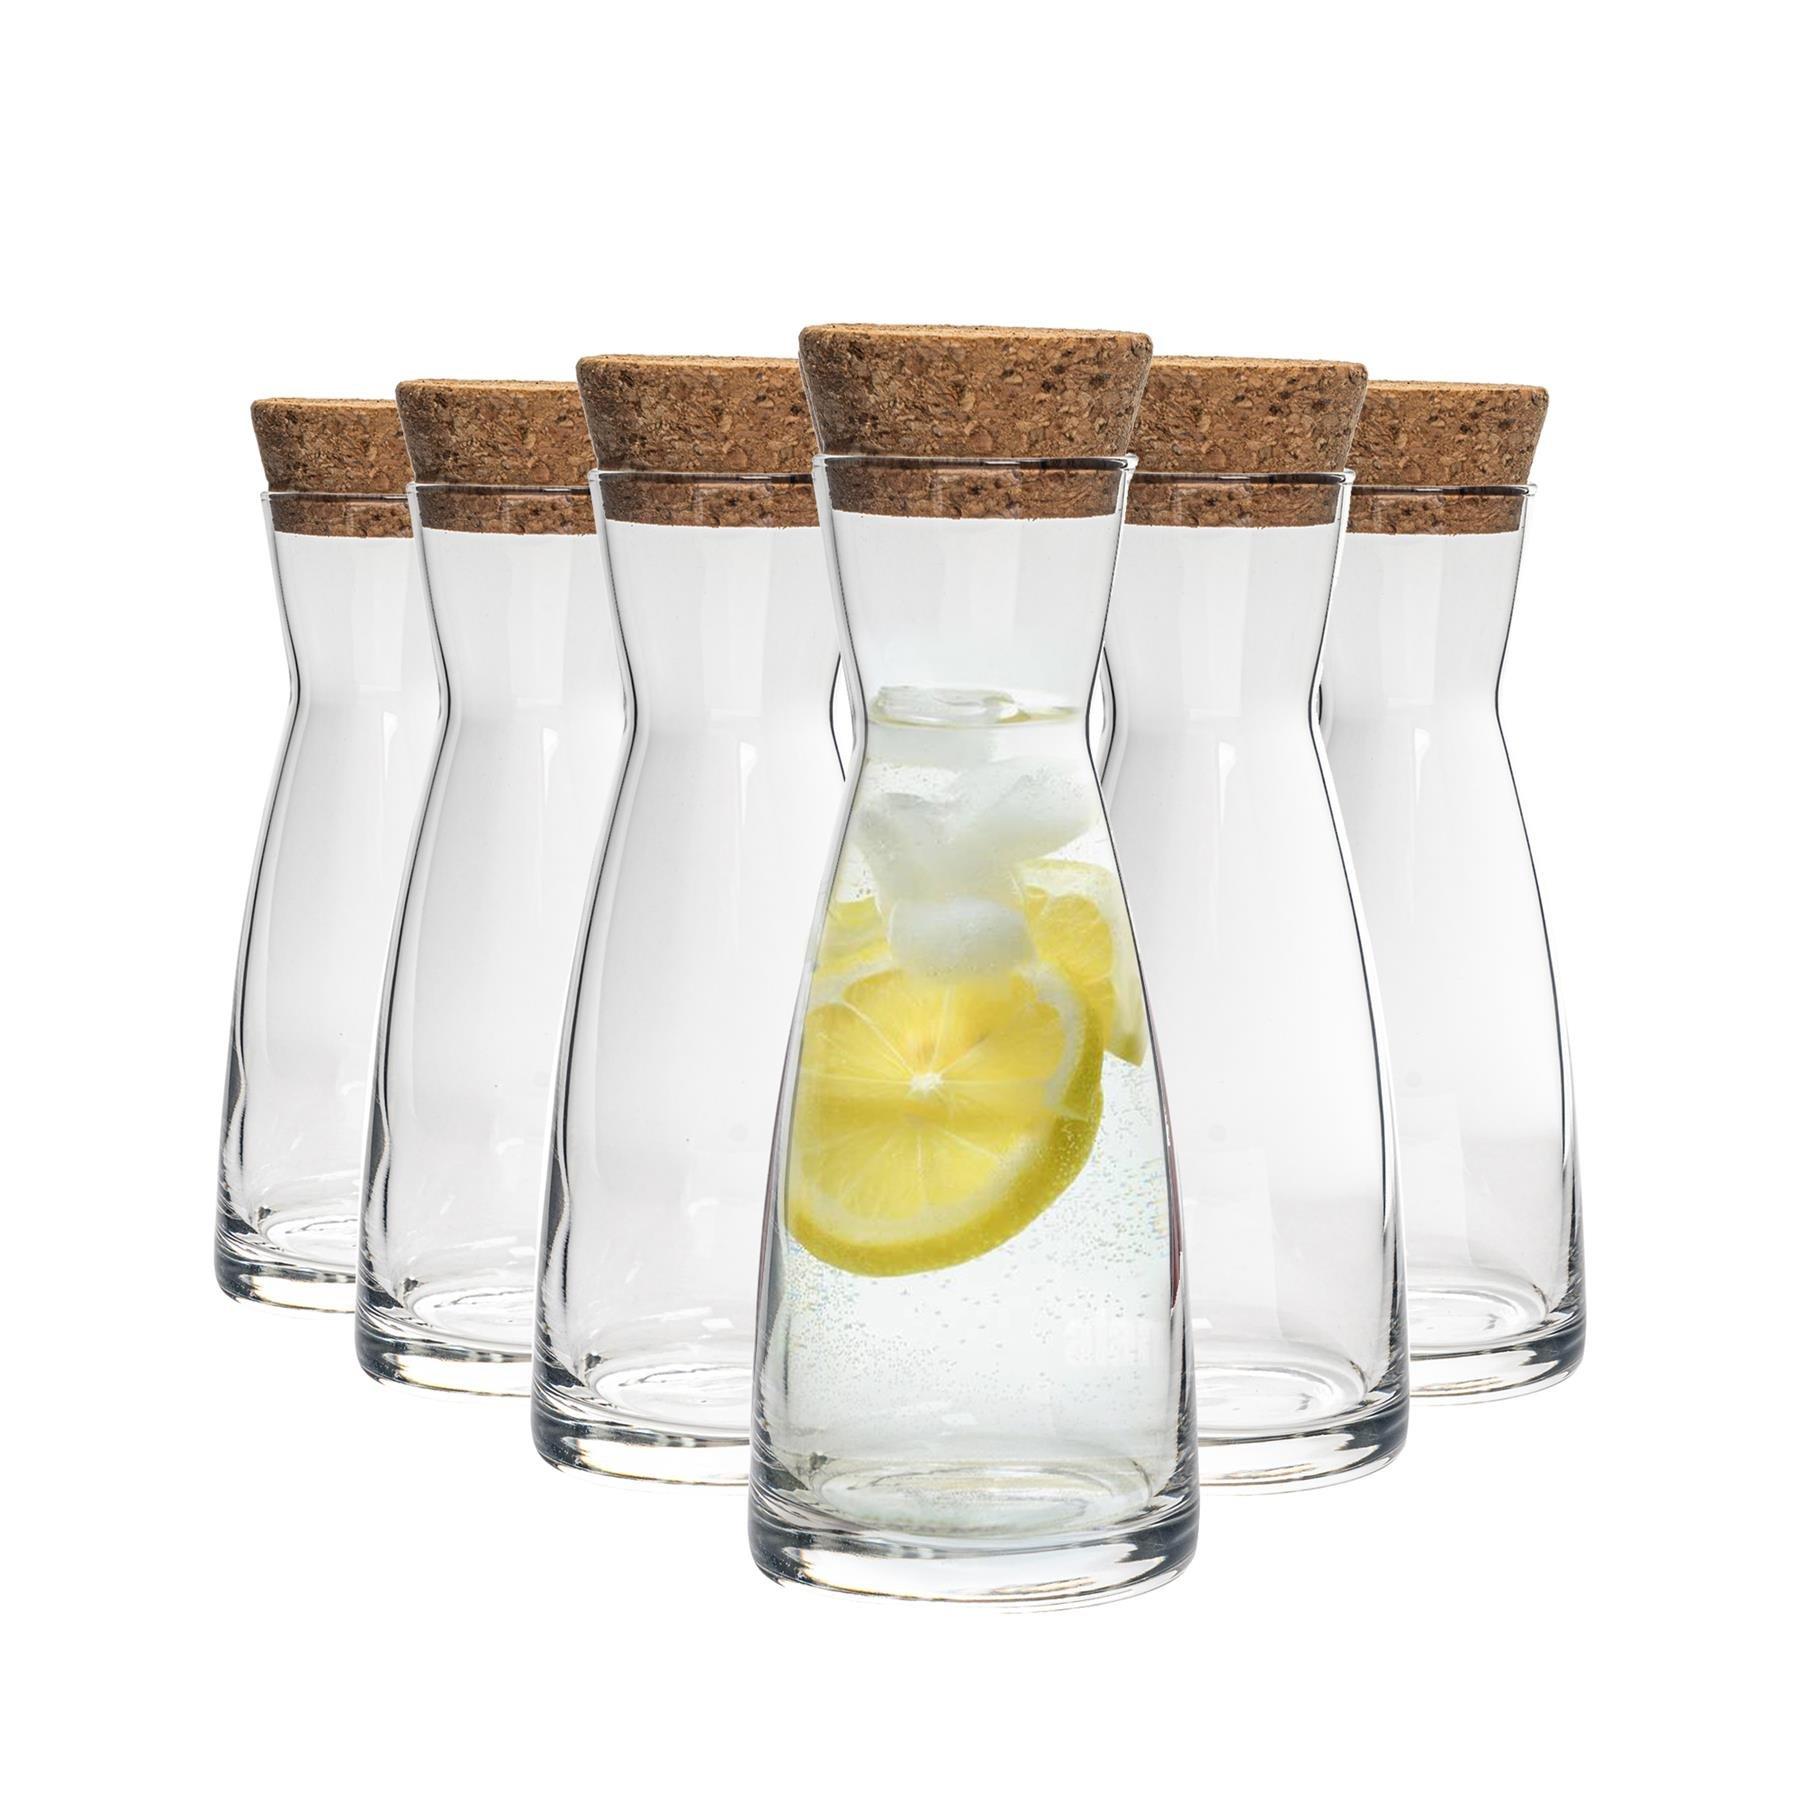 Ypsilon Glass Carafes With Cork Lids - 1.1 Litre - Pack of 6